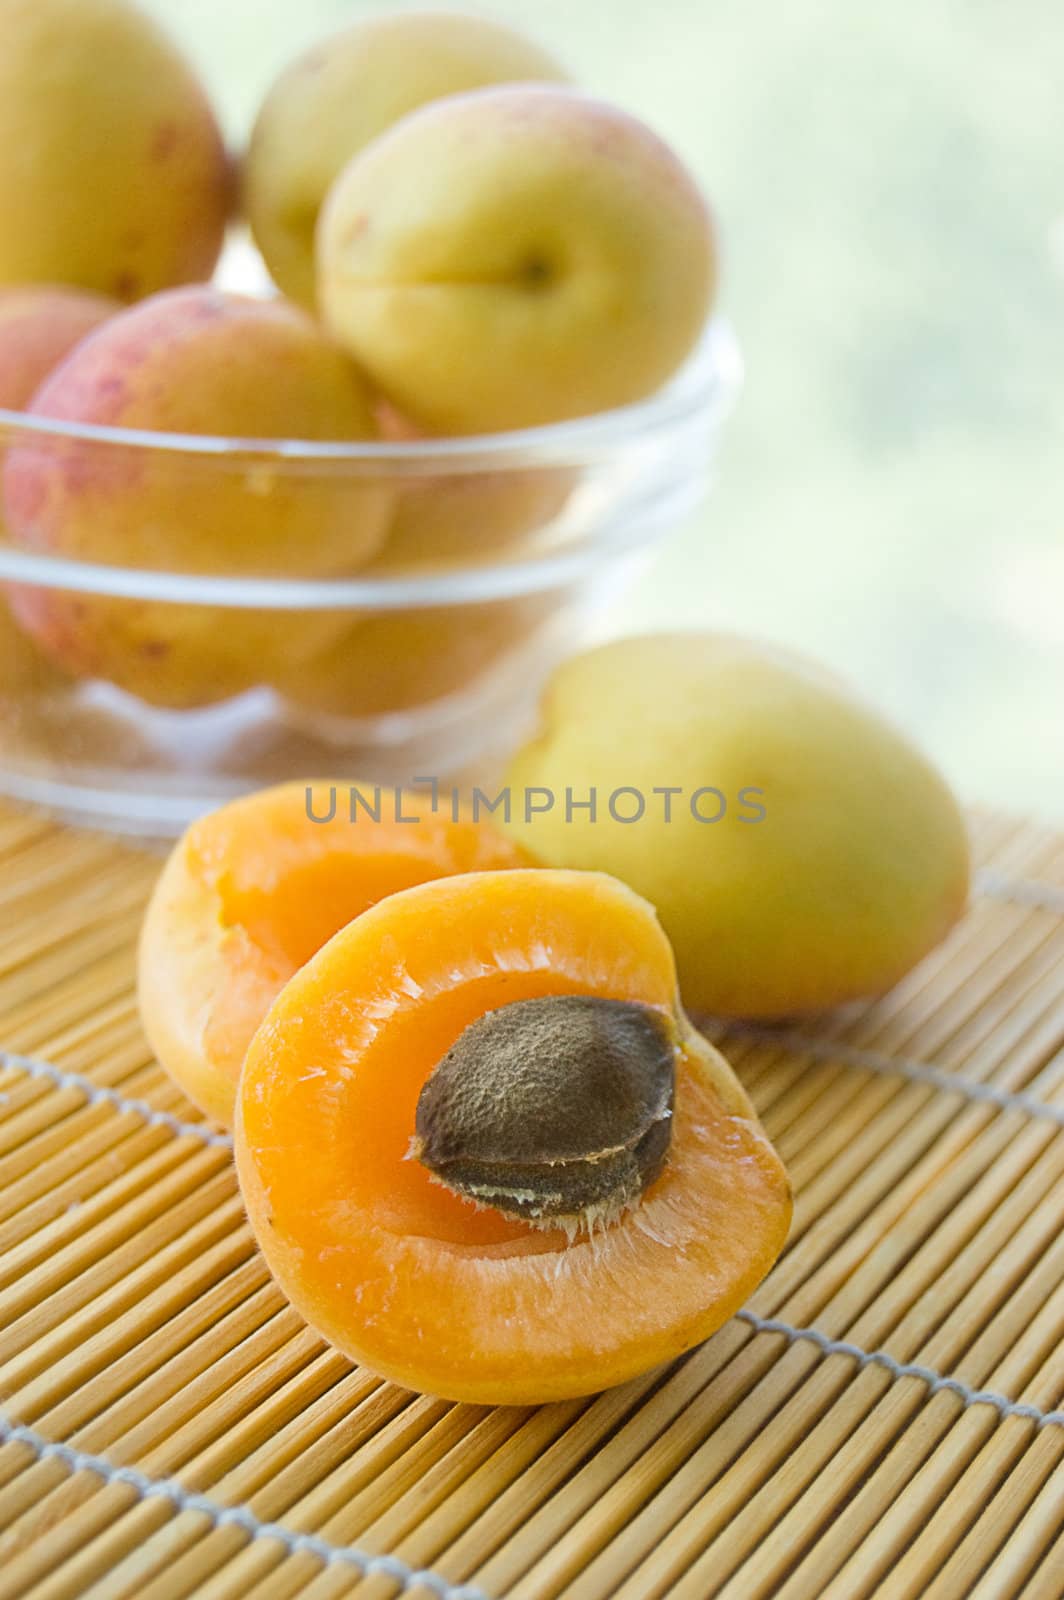 Fresh apricots by Angel_a